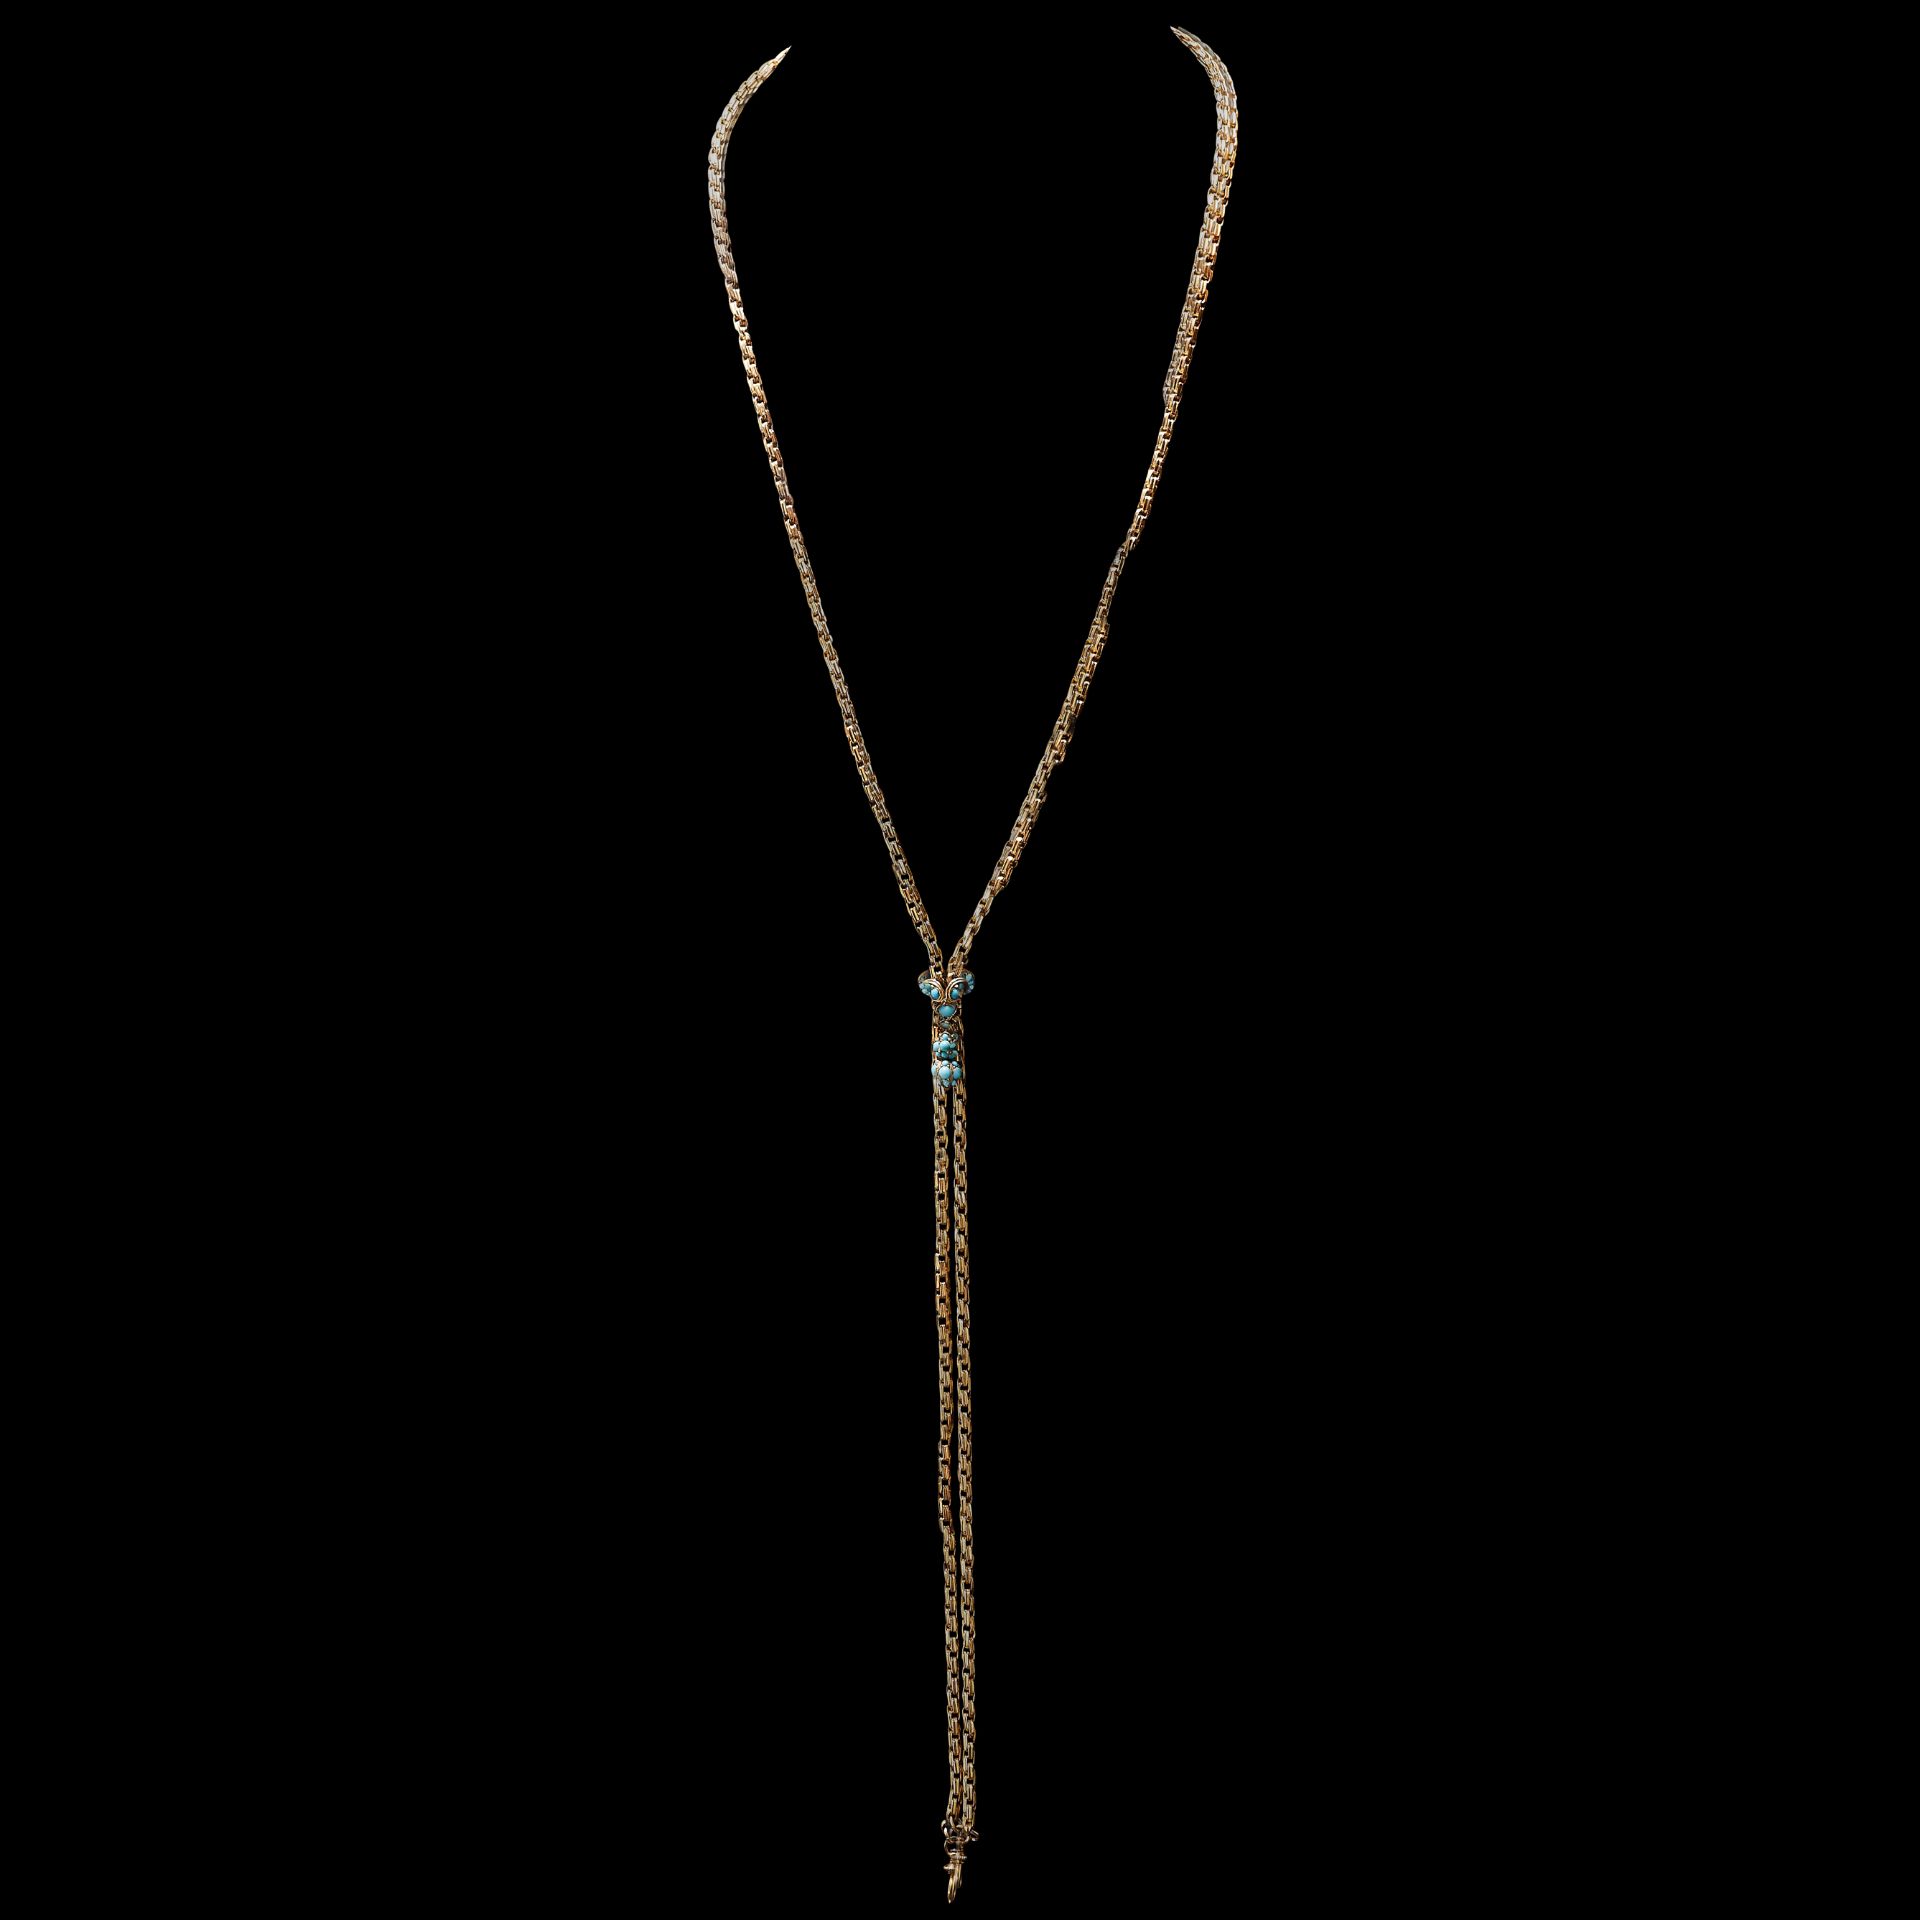 VICTORIAN GUARD CHAIN NECKLACE WITH TURQUOISE SLIDER - Image 2 of 2